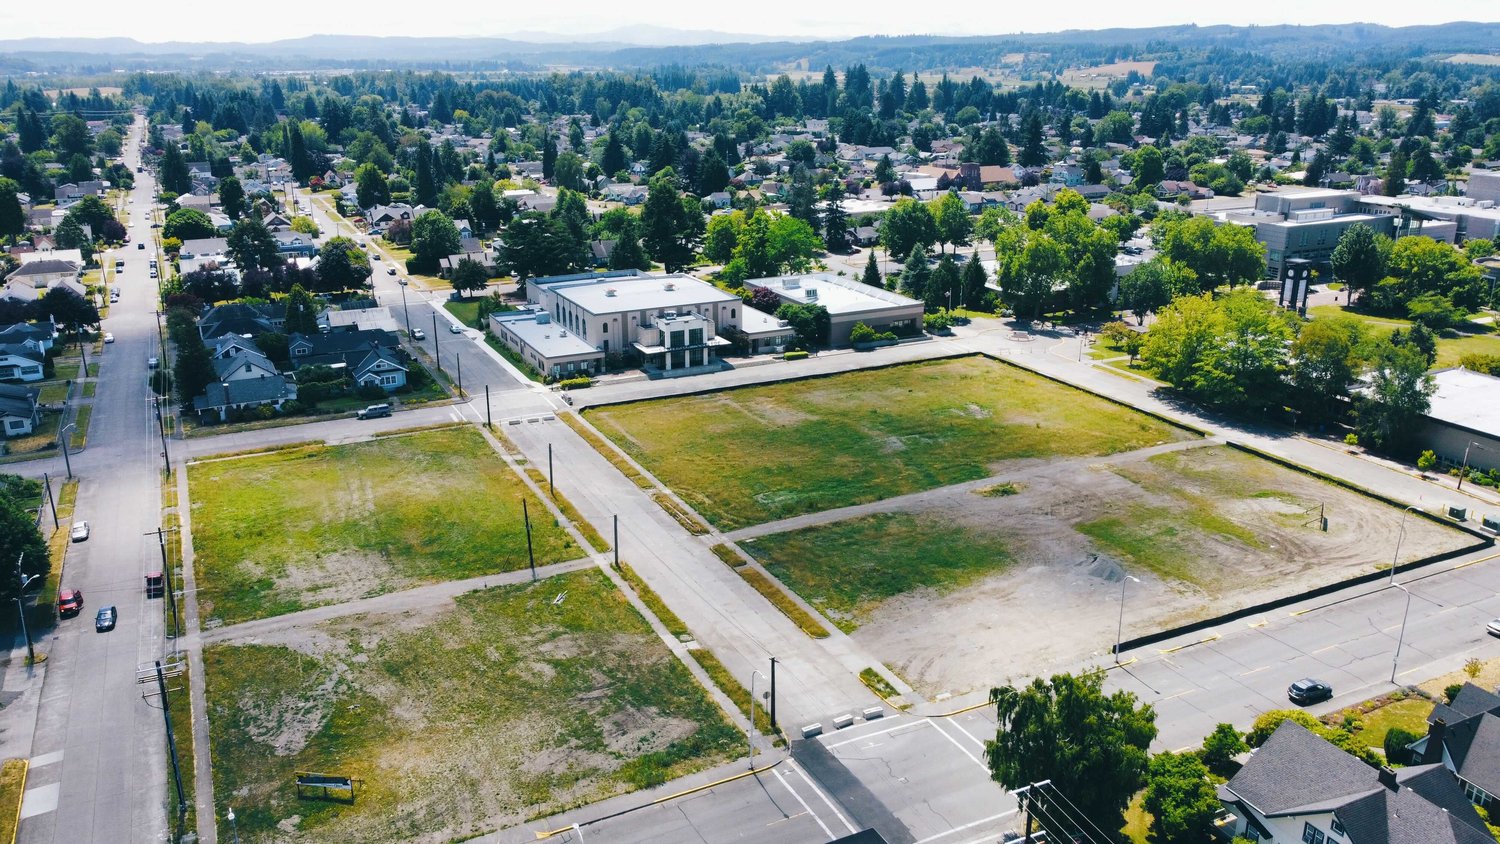 South Silver Street, left, and South Iron Street, middle, run south in this aerial view of the site where Centralia College’s athletic complex is set to be built. The college’s gymnasium sits in the top center of the photo. The new turf complex will house a baseball field, softball field and an NCAA-sized soccer pitch.